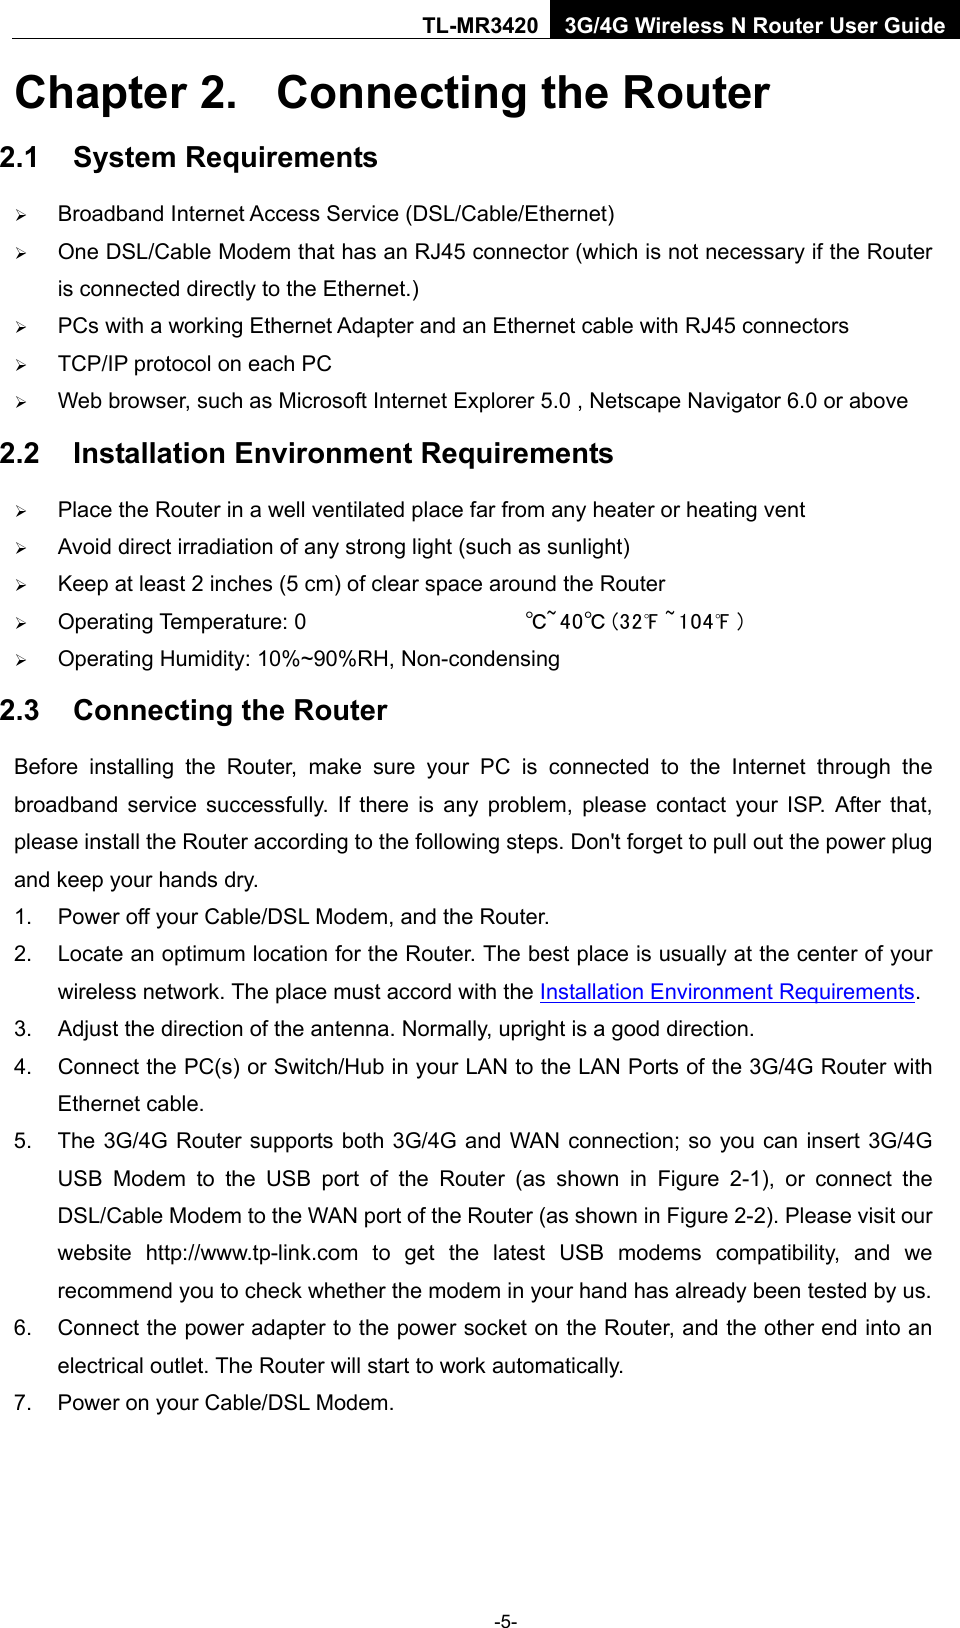    -5- TL-MR3420 3G/4G Wireless N Router User Guide Chapter 2.  Connecting the Router 2.1 System Requirements  Broadband Internet Access Service (DSL/Cable/Ethernet)  One DSL/Cable Modem that has an RJ45 connector (which is not necessary if the Router is connected directly to the Ethernet.)  PCs with a working Ethernet Adapter and an Ethernet cable with RJ45 connectors    TCP/IP protocol on each PC  Web browser, such as Microsoft Internet Explorer 5.0 , Netscape Navigator 6.0 or above 2.2 Installation Environment Requirements  Place the Router in a well ventilated place far from any heater or heating vent    Avoid direct irradiation of any strong light (such as sunlight)  Keep at least 2 inches (5 cm) of clear space around the Router  Operating Temperature: 0 ℃~40℃ (32℉ ~104℉ )  Operating Humidity: 10%~90%RH, Non-condensing 2.3 Connecting the Router Before installing the  Router,  make sure your PC is  connected to the Internet through the broadband service successfully. If there is any problem, please contact your ISP. After that, please install the Router according to the following steps. Don&apos;t forget to pull out the power plug and keep your hands dry. 1. Power off your Cable/DSL Modem, and the Router.   2. Locate an optimum location for the Router. The best place is usually at the center of your wireless network. The place must accord with the Installation Environment Requirements.   3. Adjust the direction of the antenna. Normally, upright is a good direction. 4. Connect the PC(s) or Switch/Hub in your LAN to the LAN Ports of the 3G/4G Router with Ethernet cable.   5. The 3G/4G Router supports both 3G/4G and WAN connection; so you can insert 3G/4G USB Modem to the USB port of the Router (as shown in Figure 2-1), or  connect the DSL/Cable Modem to the WAN port of the Router (as shown in Figure 2-2). Please visit our website  http://www.tp-link.com to get the latest USB modems compatibility, and we recommend you to check whether the modem in your hand has already been tested by us. 6. Connect the power adapter to the power socket on the Router, and the other end into an electrical outlet. The Router will start to work automatically. 7. Power on your Cable/DSL Modem. 